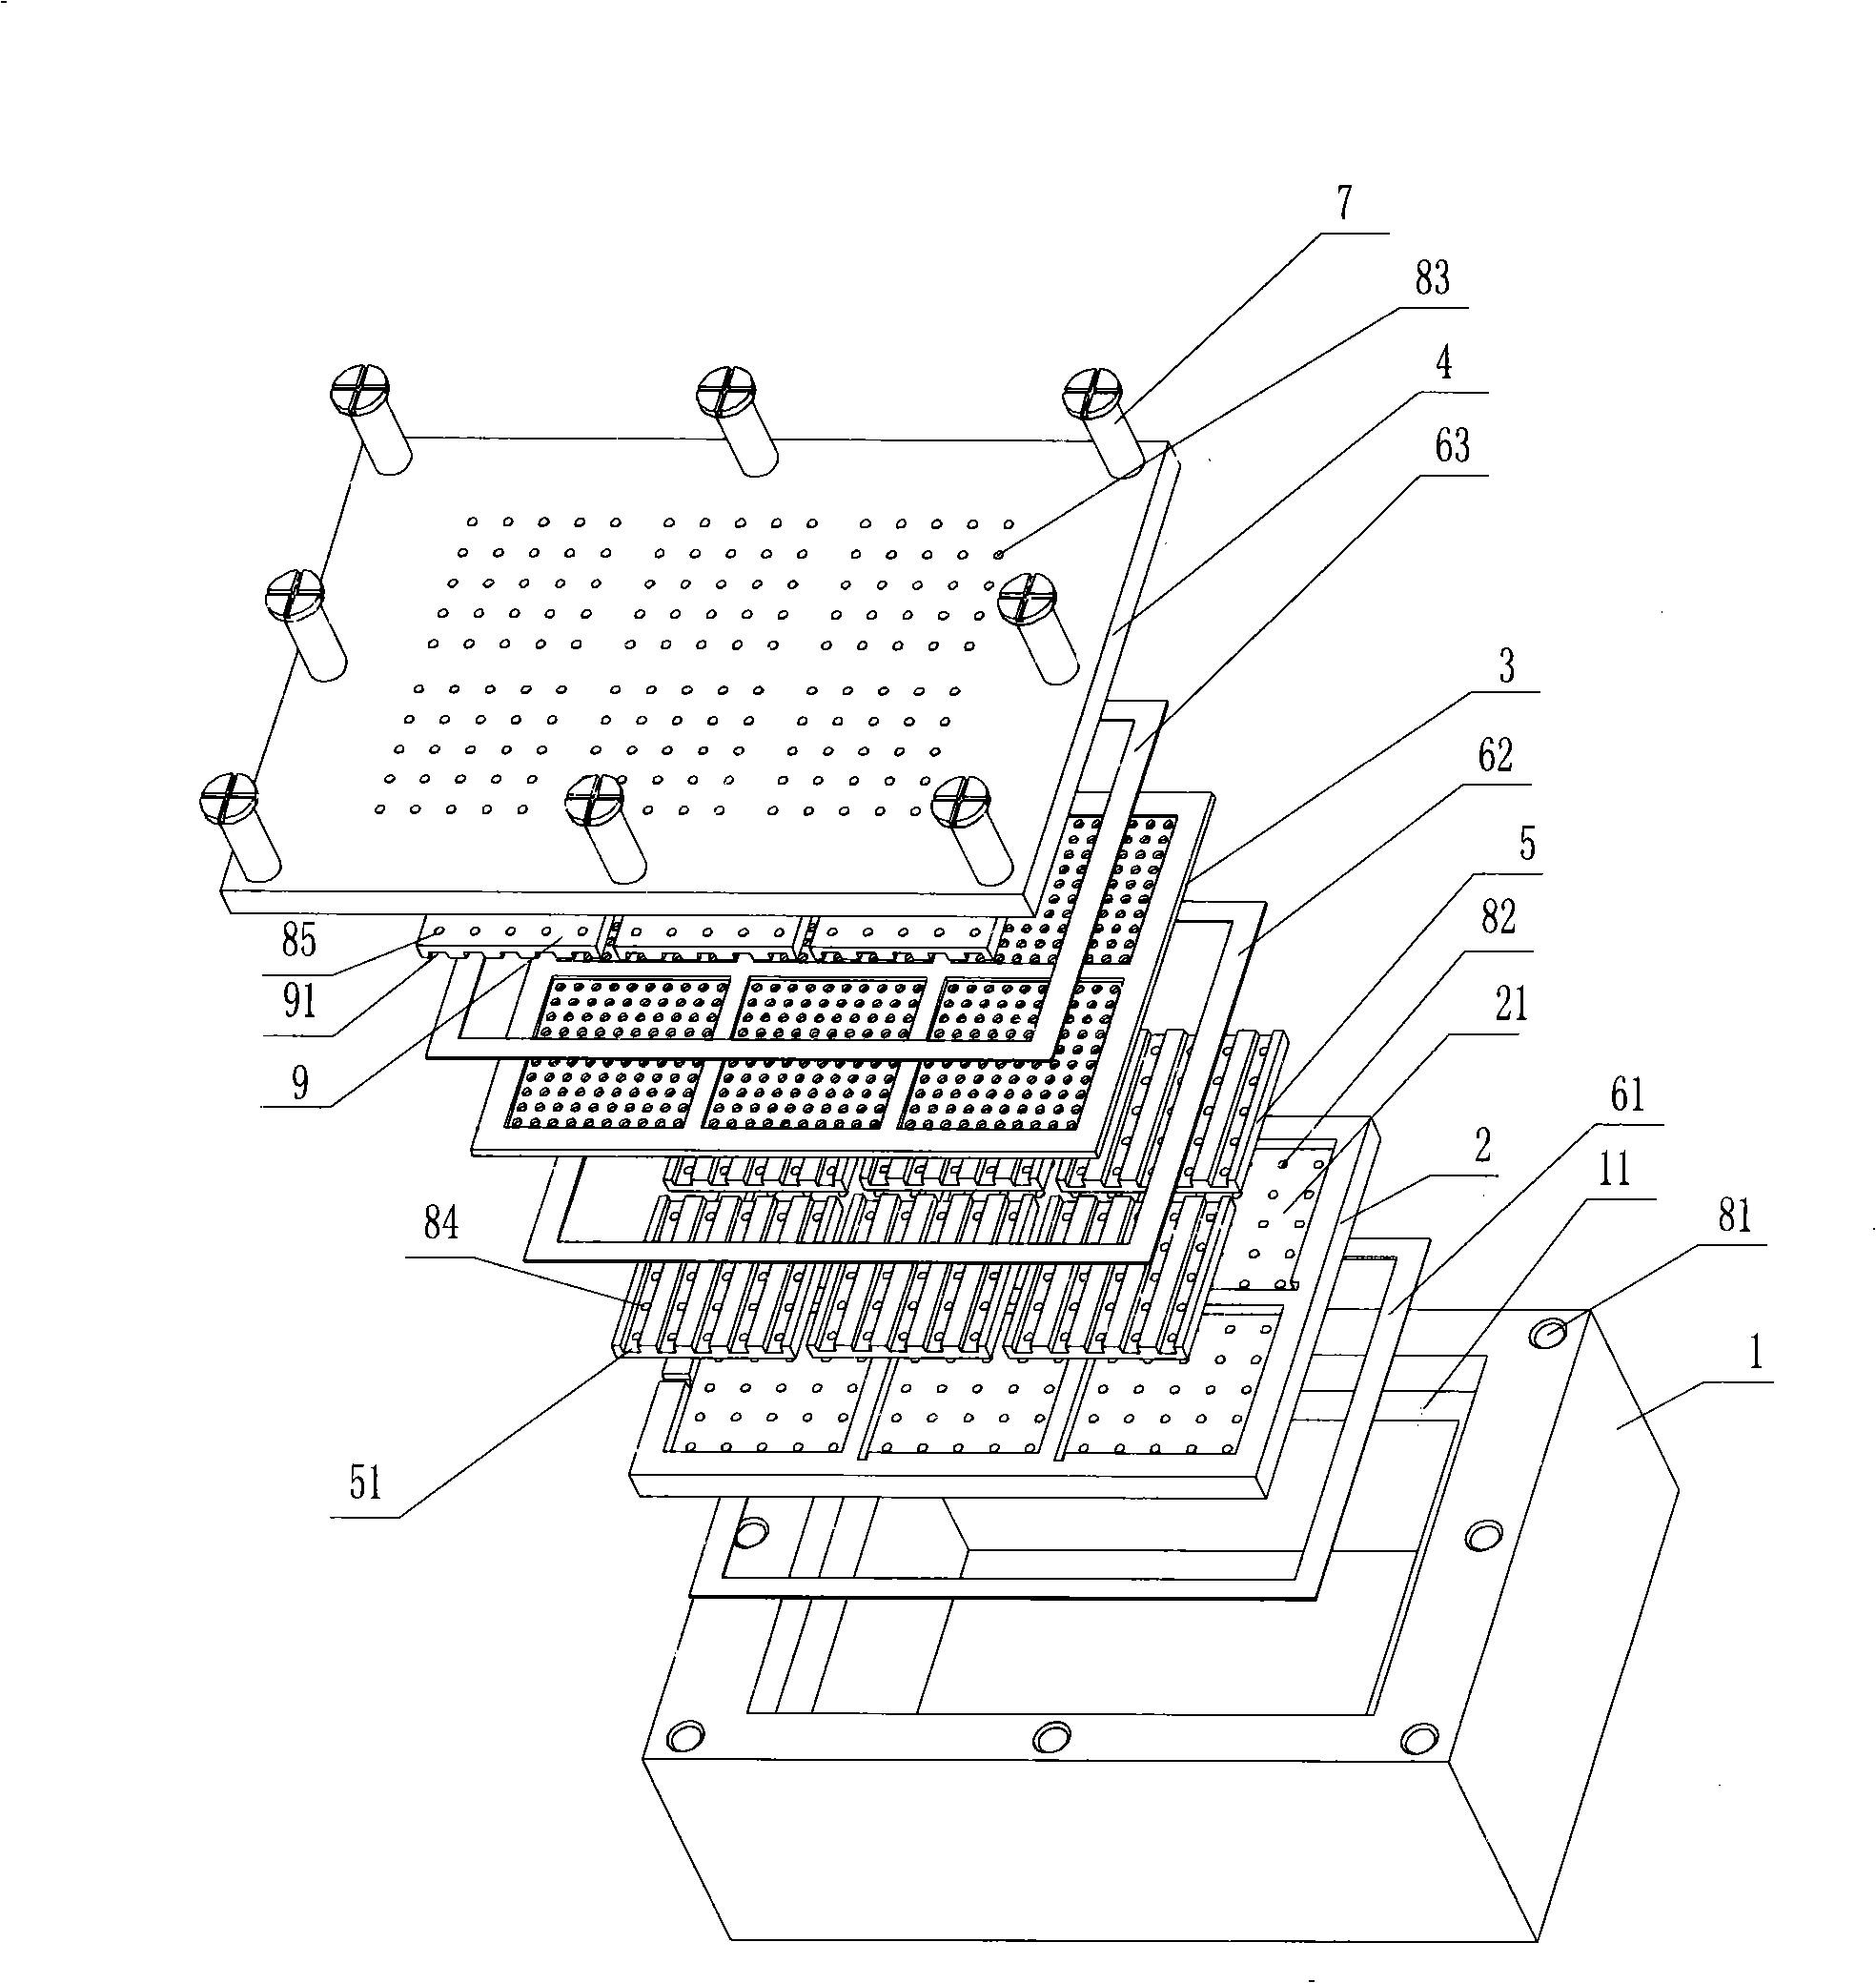 Power supply system for minisize composite regenerative fuel battery